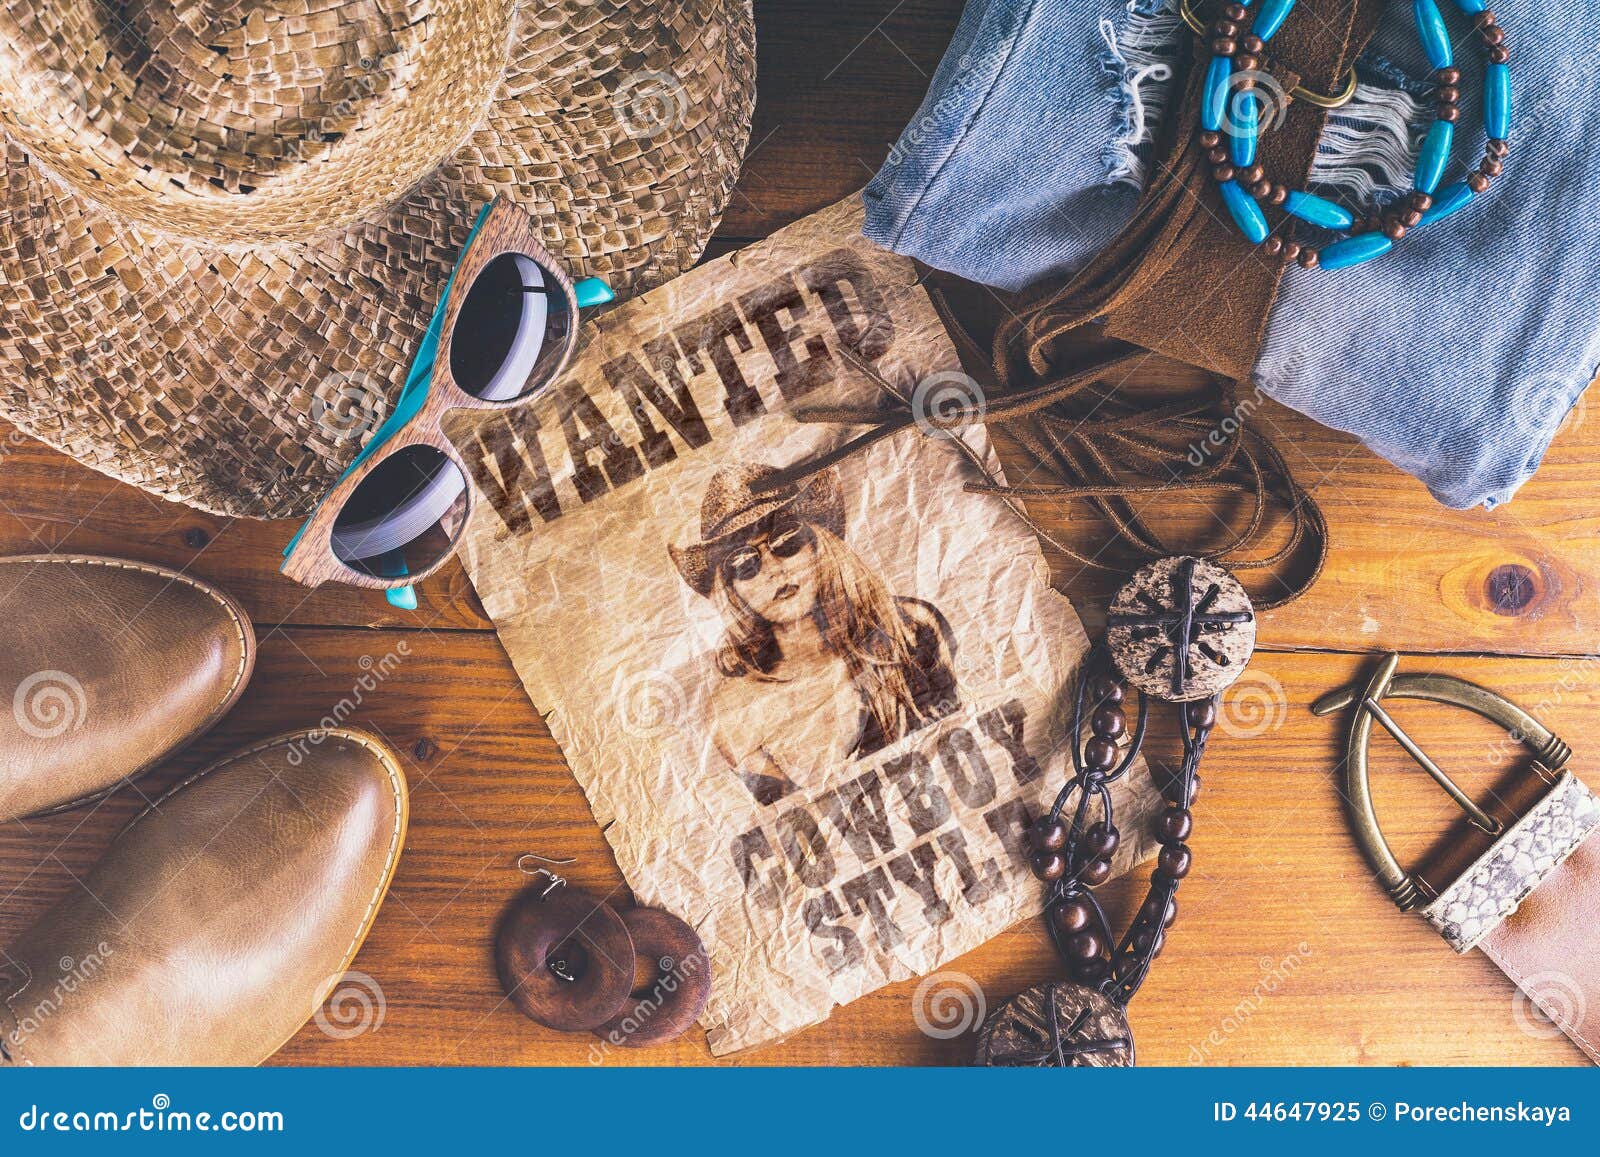 Accessories Cowboy Retro Style Stock Image - Image of country, hardwood ...